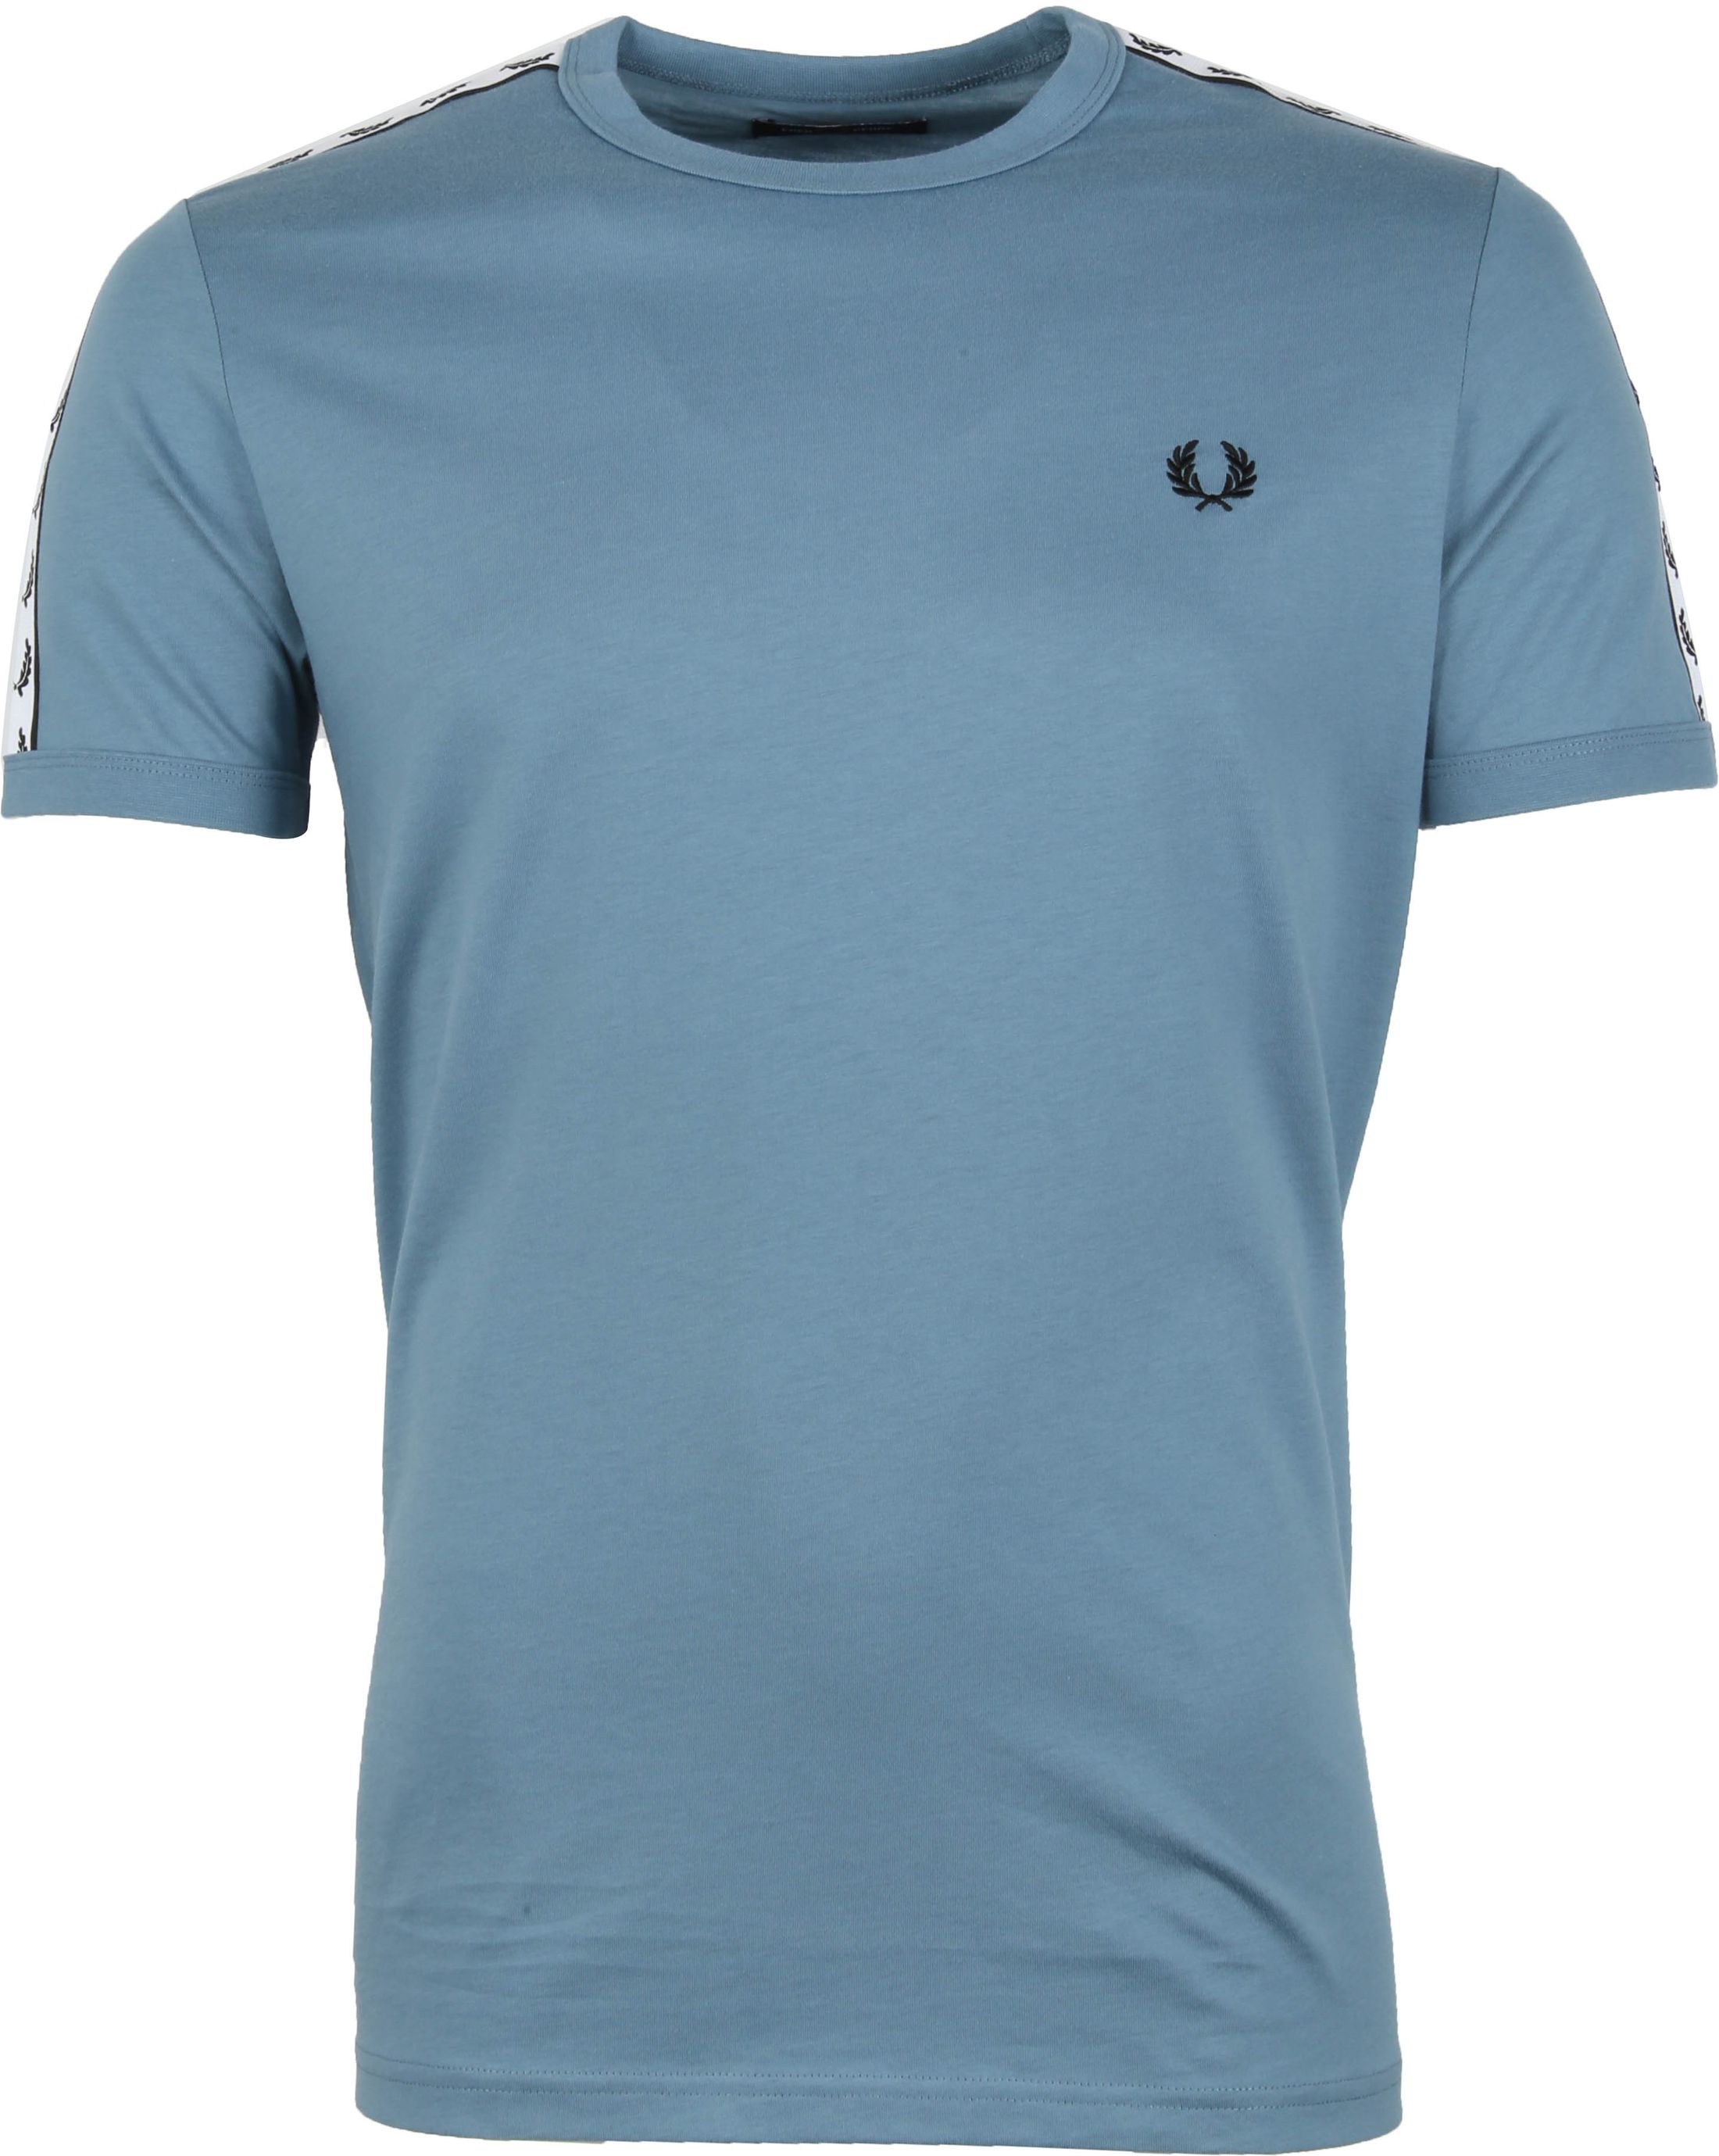 Fred Perry T-Shirt Light M6347 Blue size L